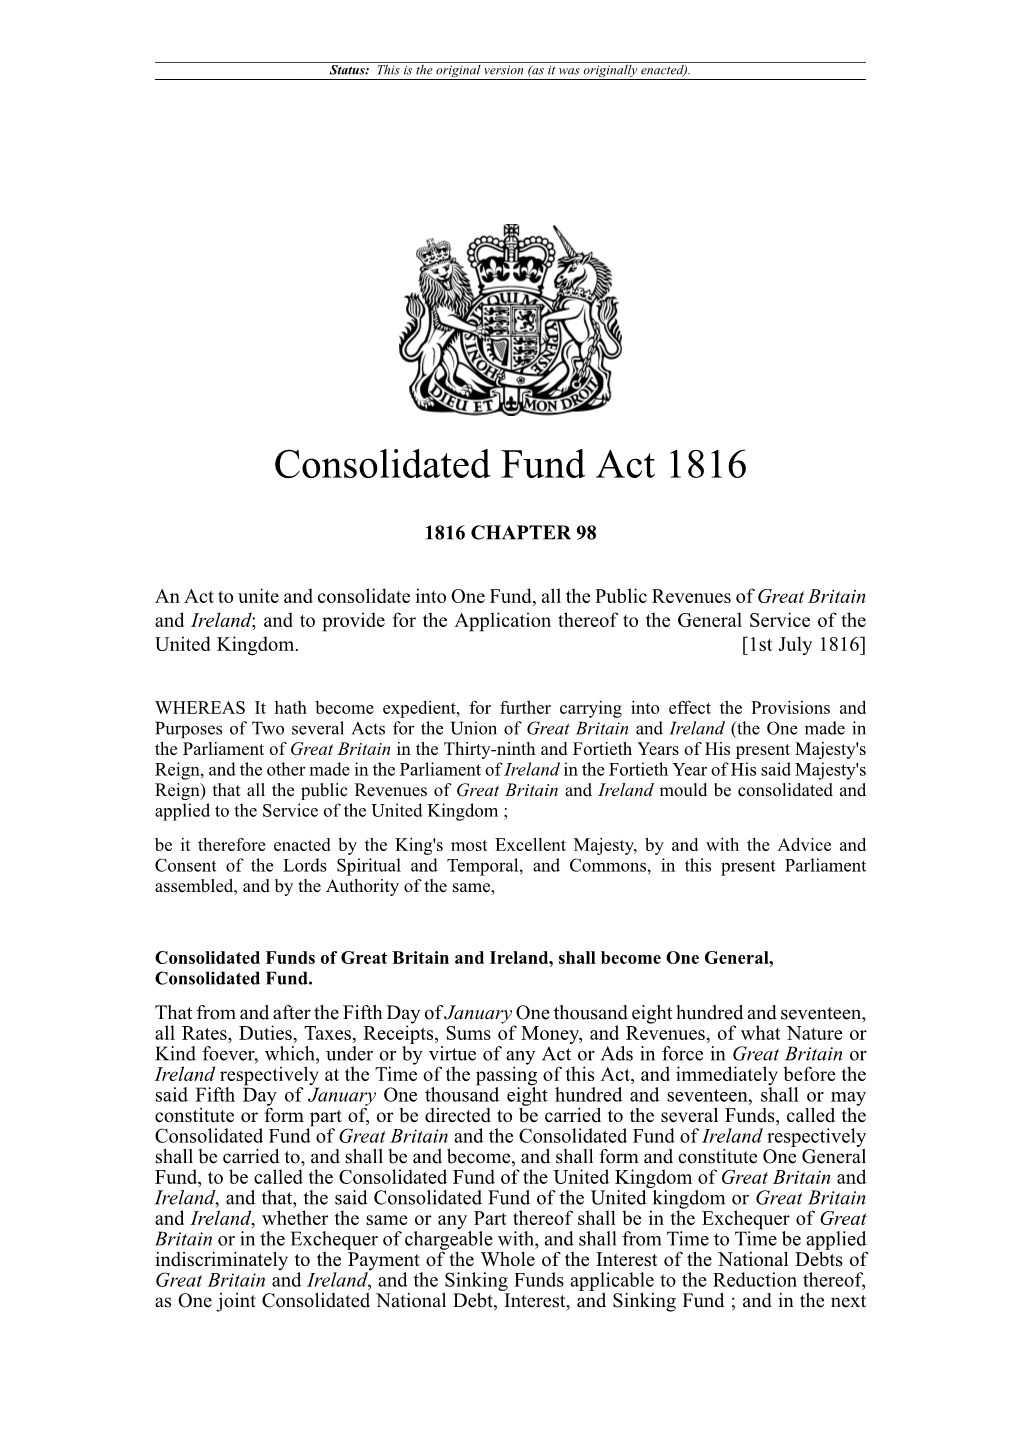 Consolidated Fund Act 1816